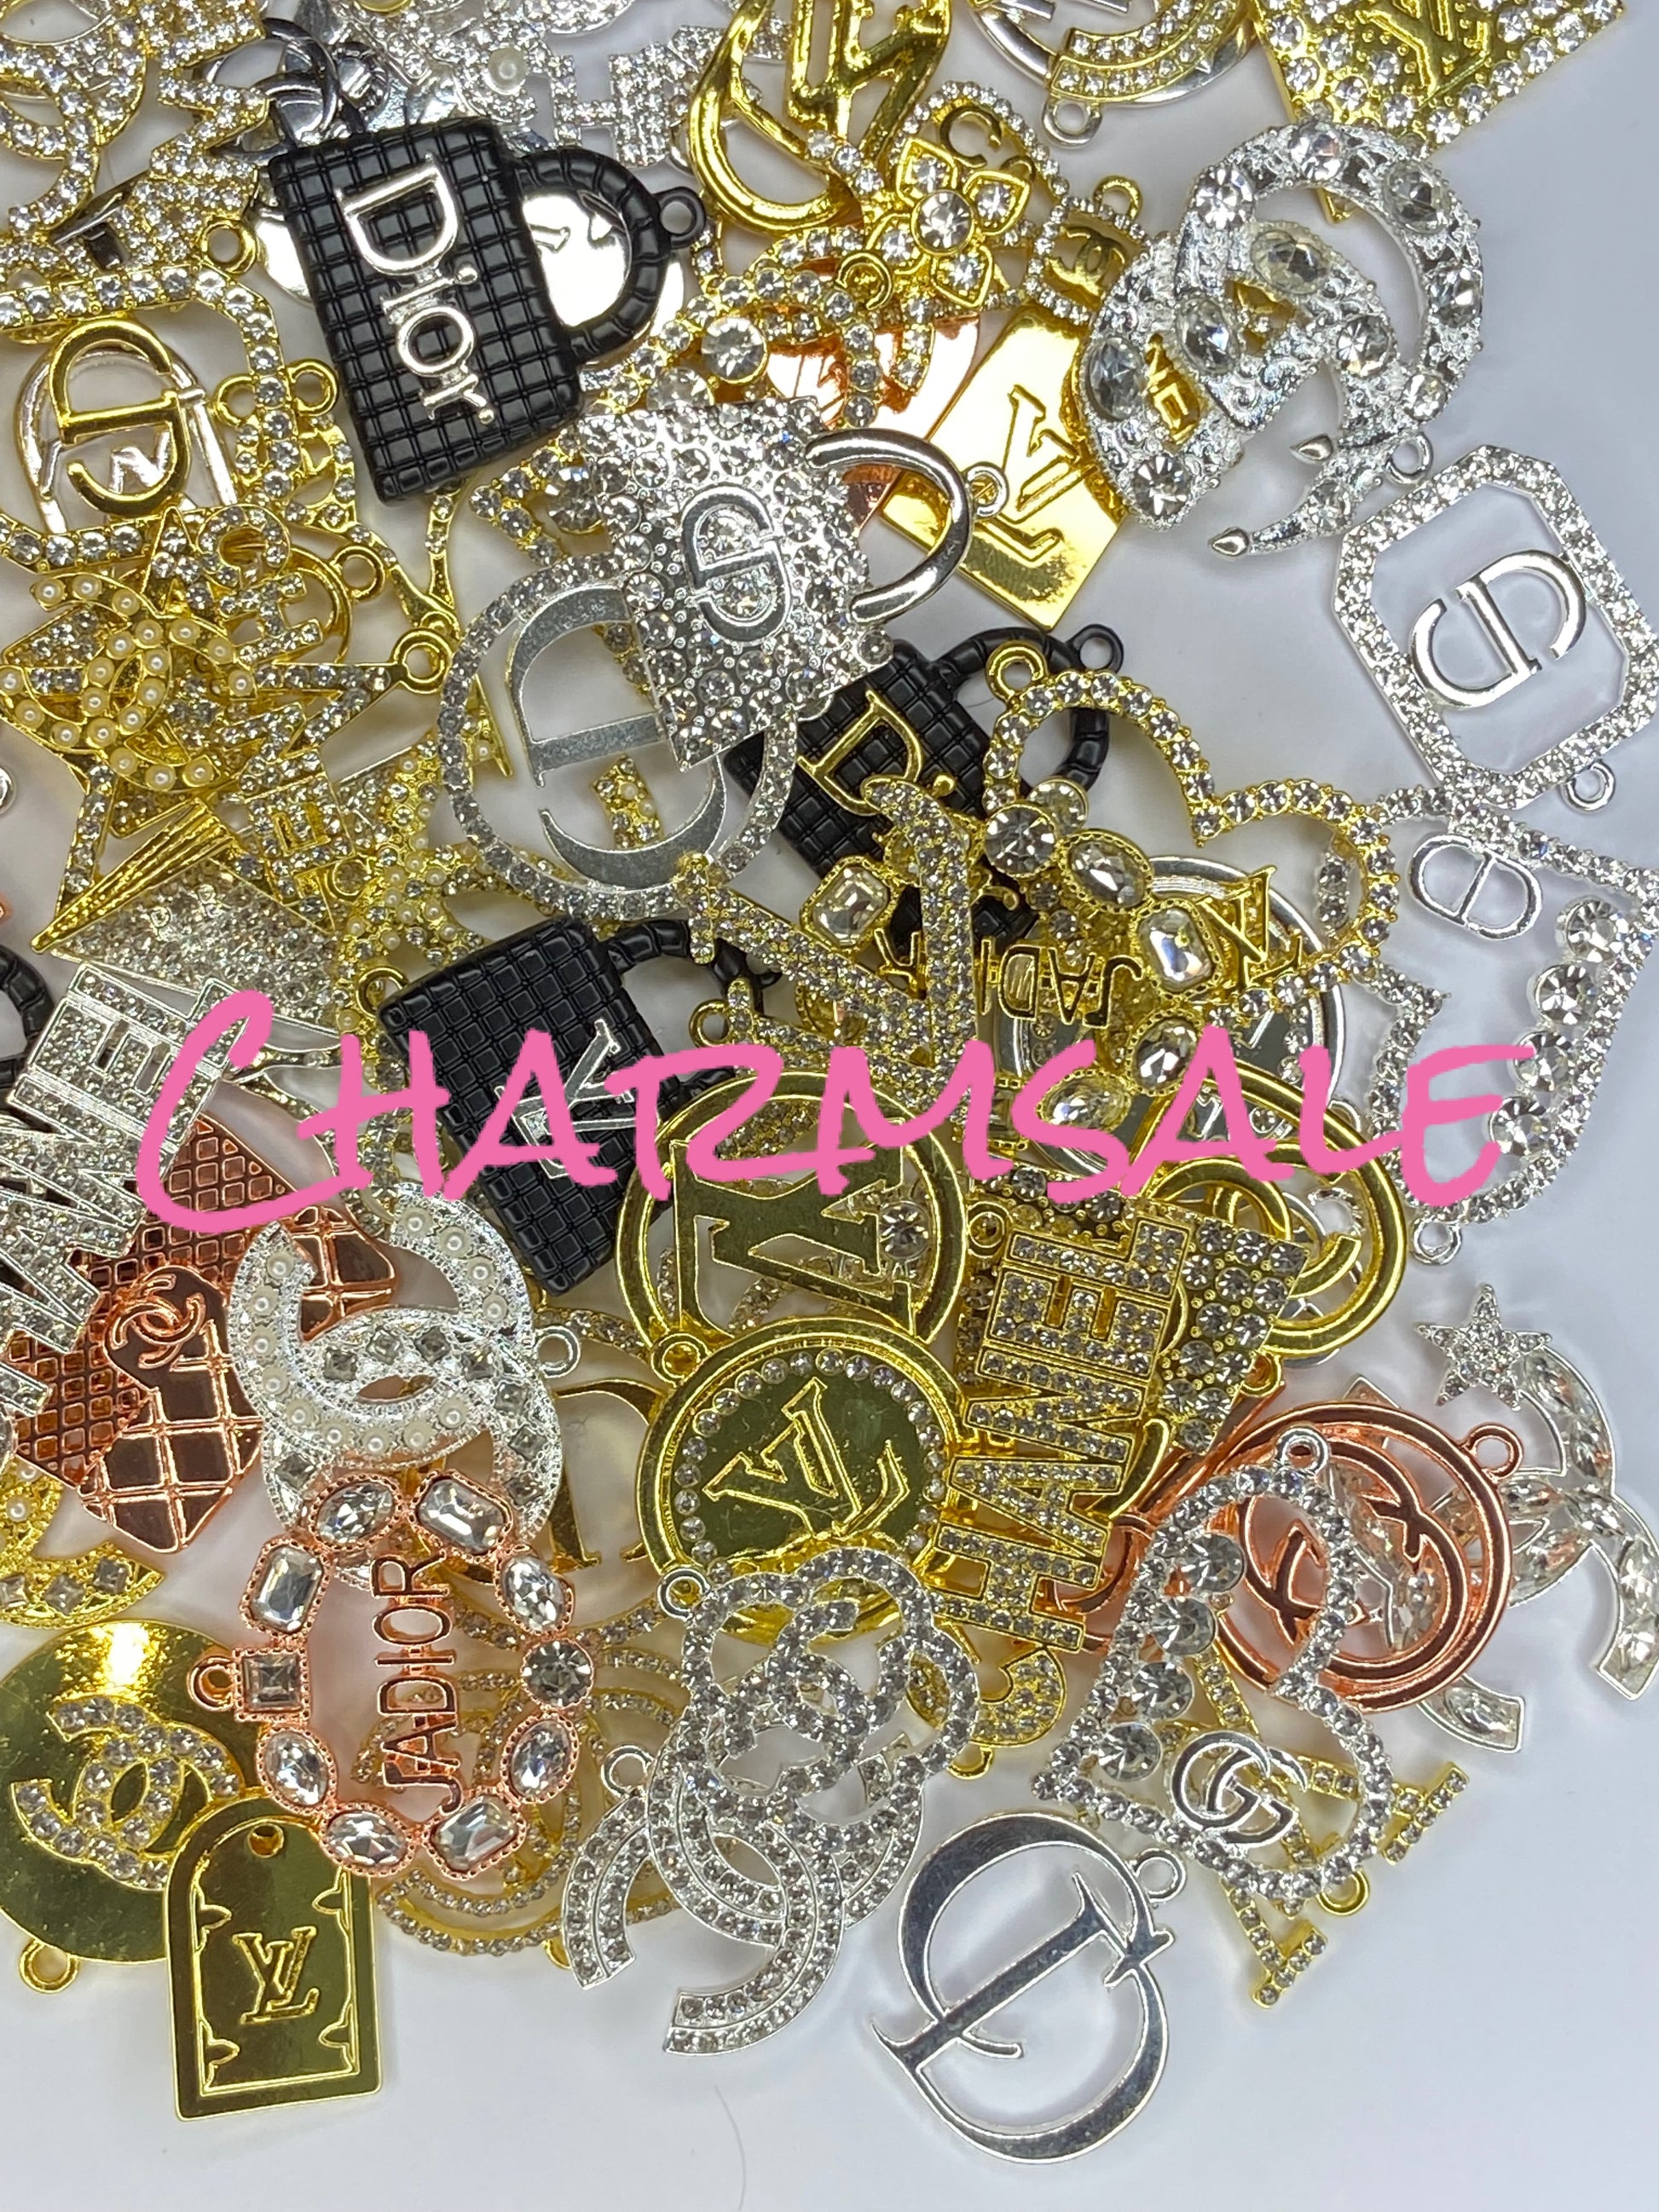 follow @Obcpersonalised to shop! newwwww! design3r charms added